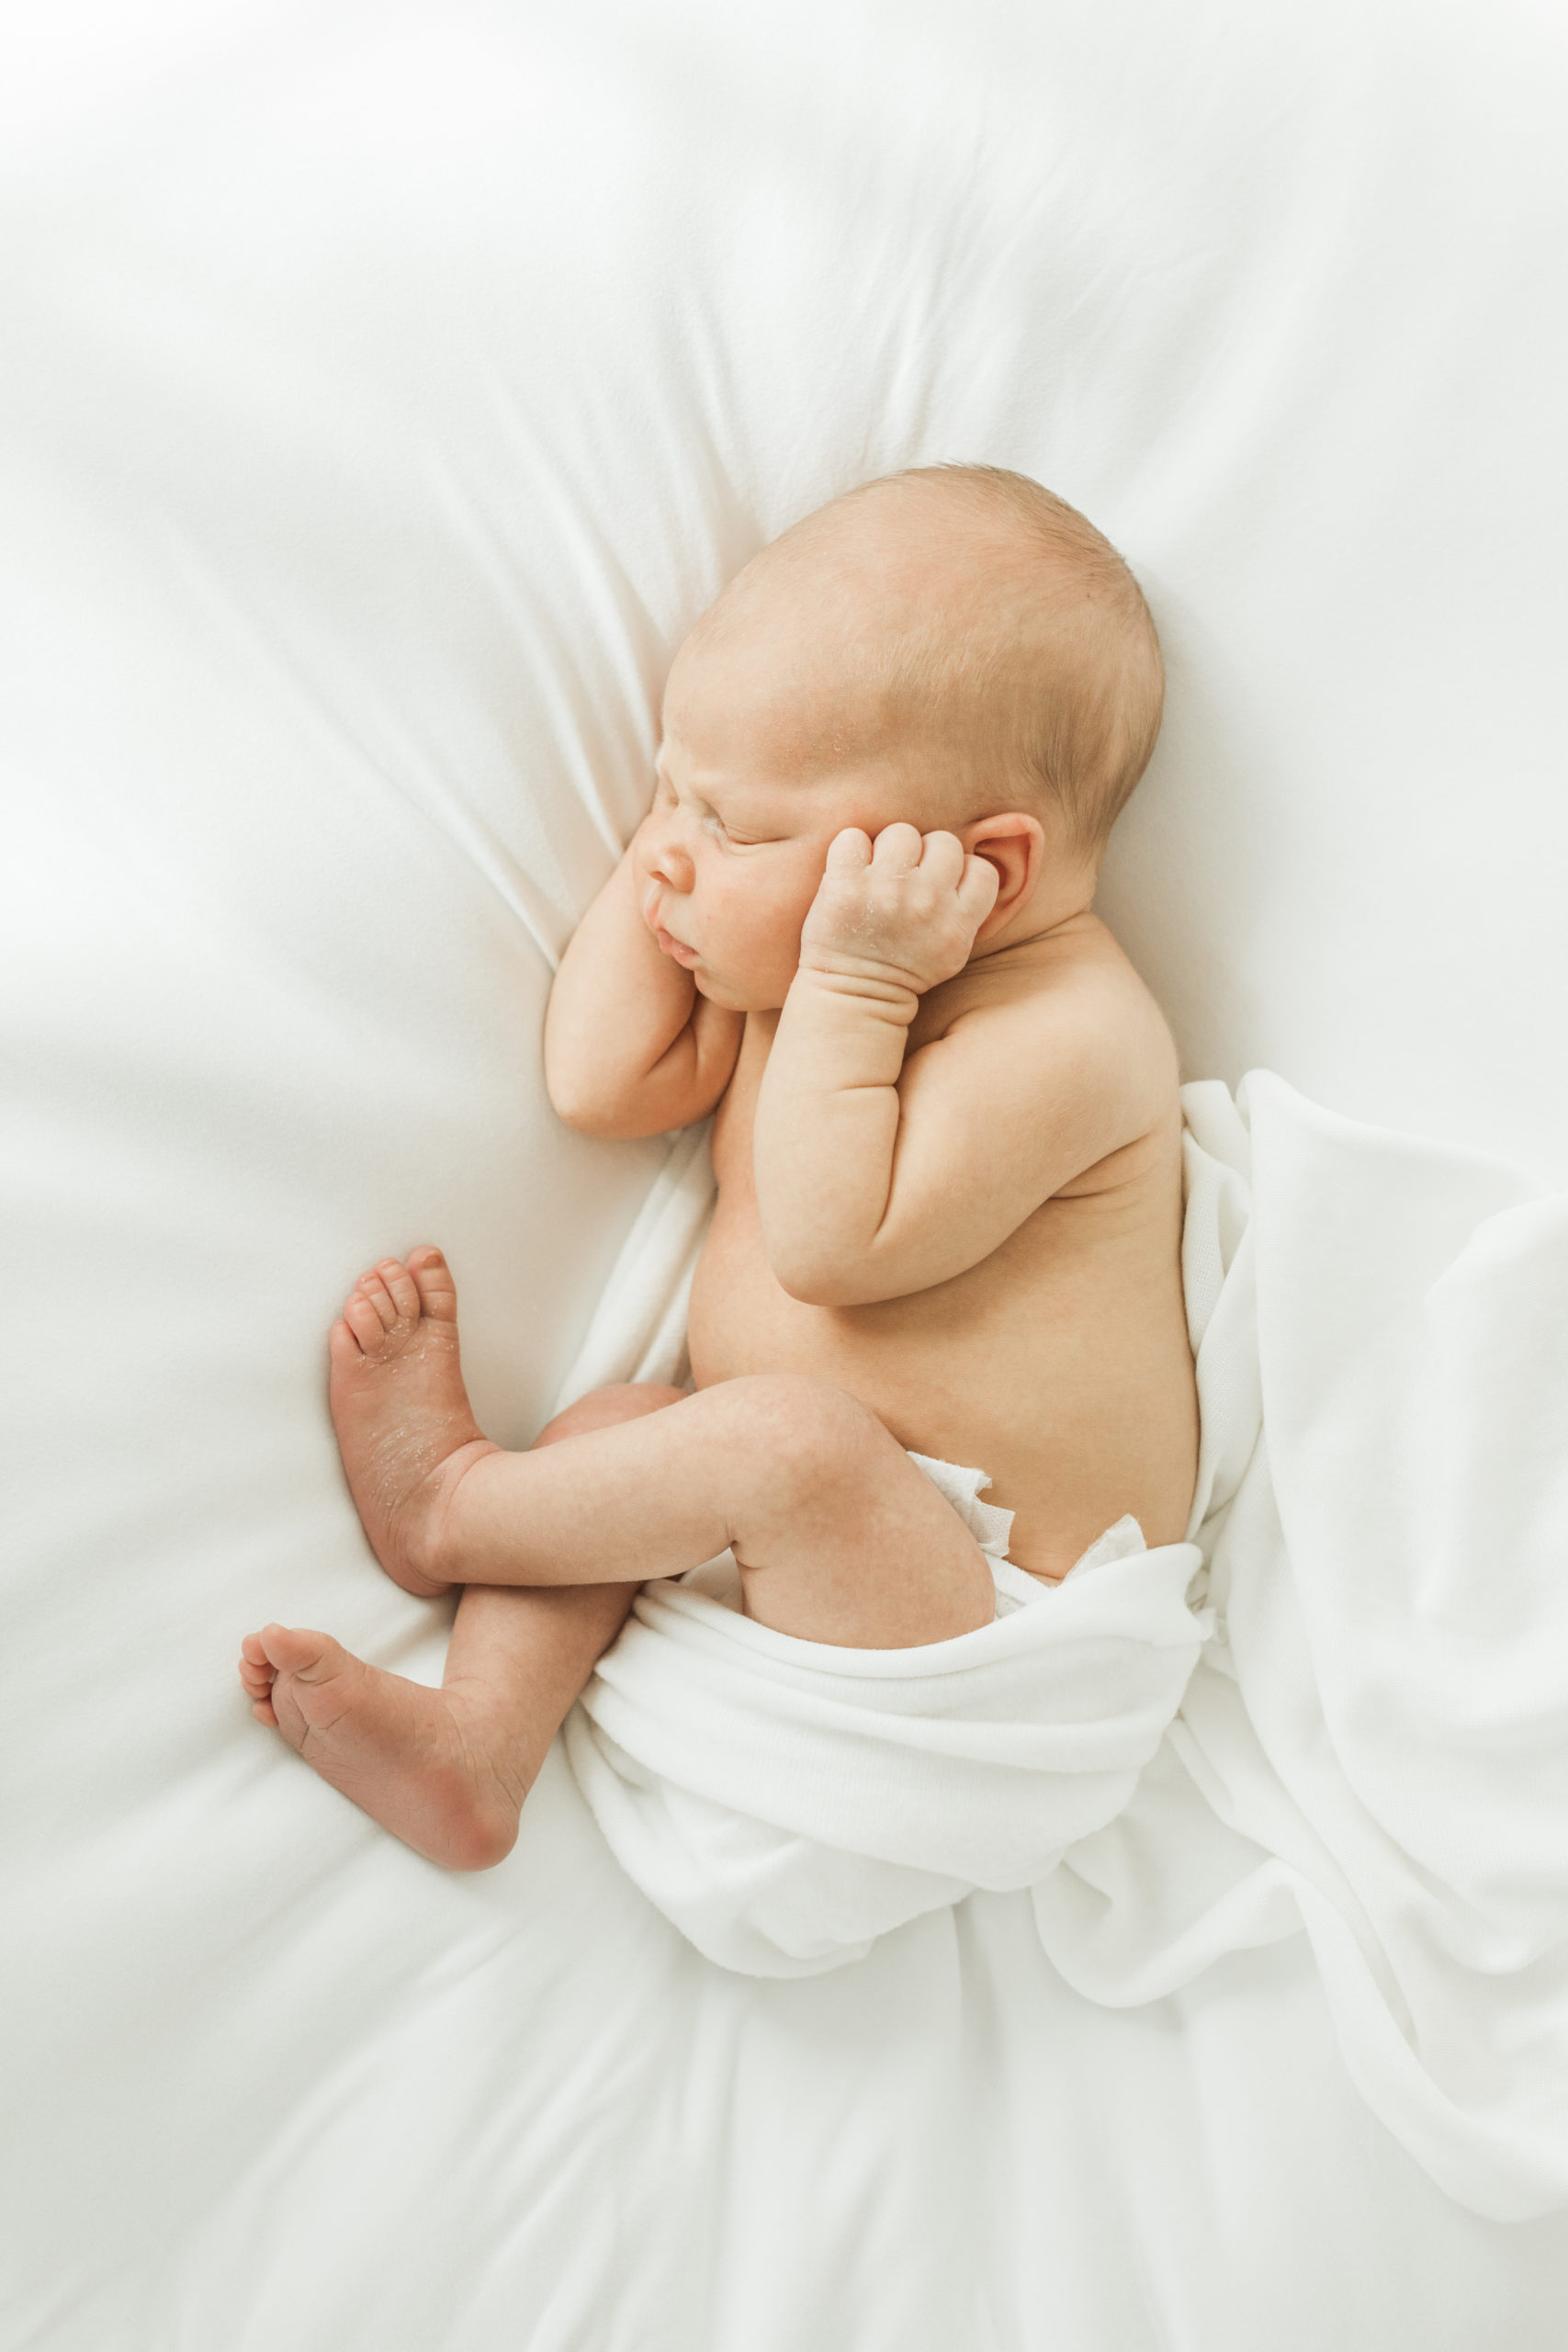 Newborn baby boy on white bed wrapped in white blanket. Baby's hands covering his ears.